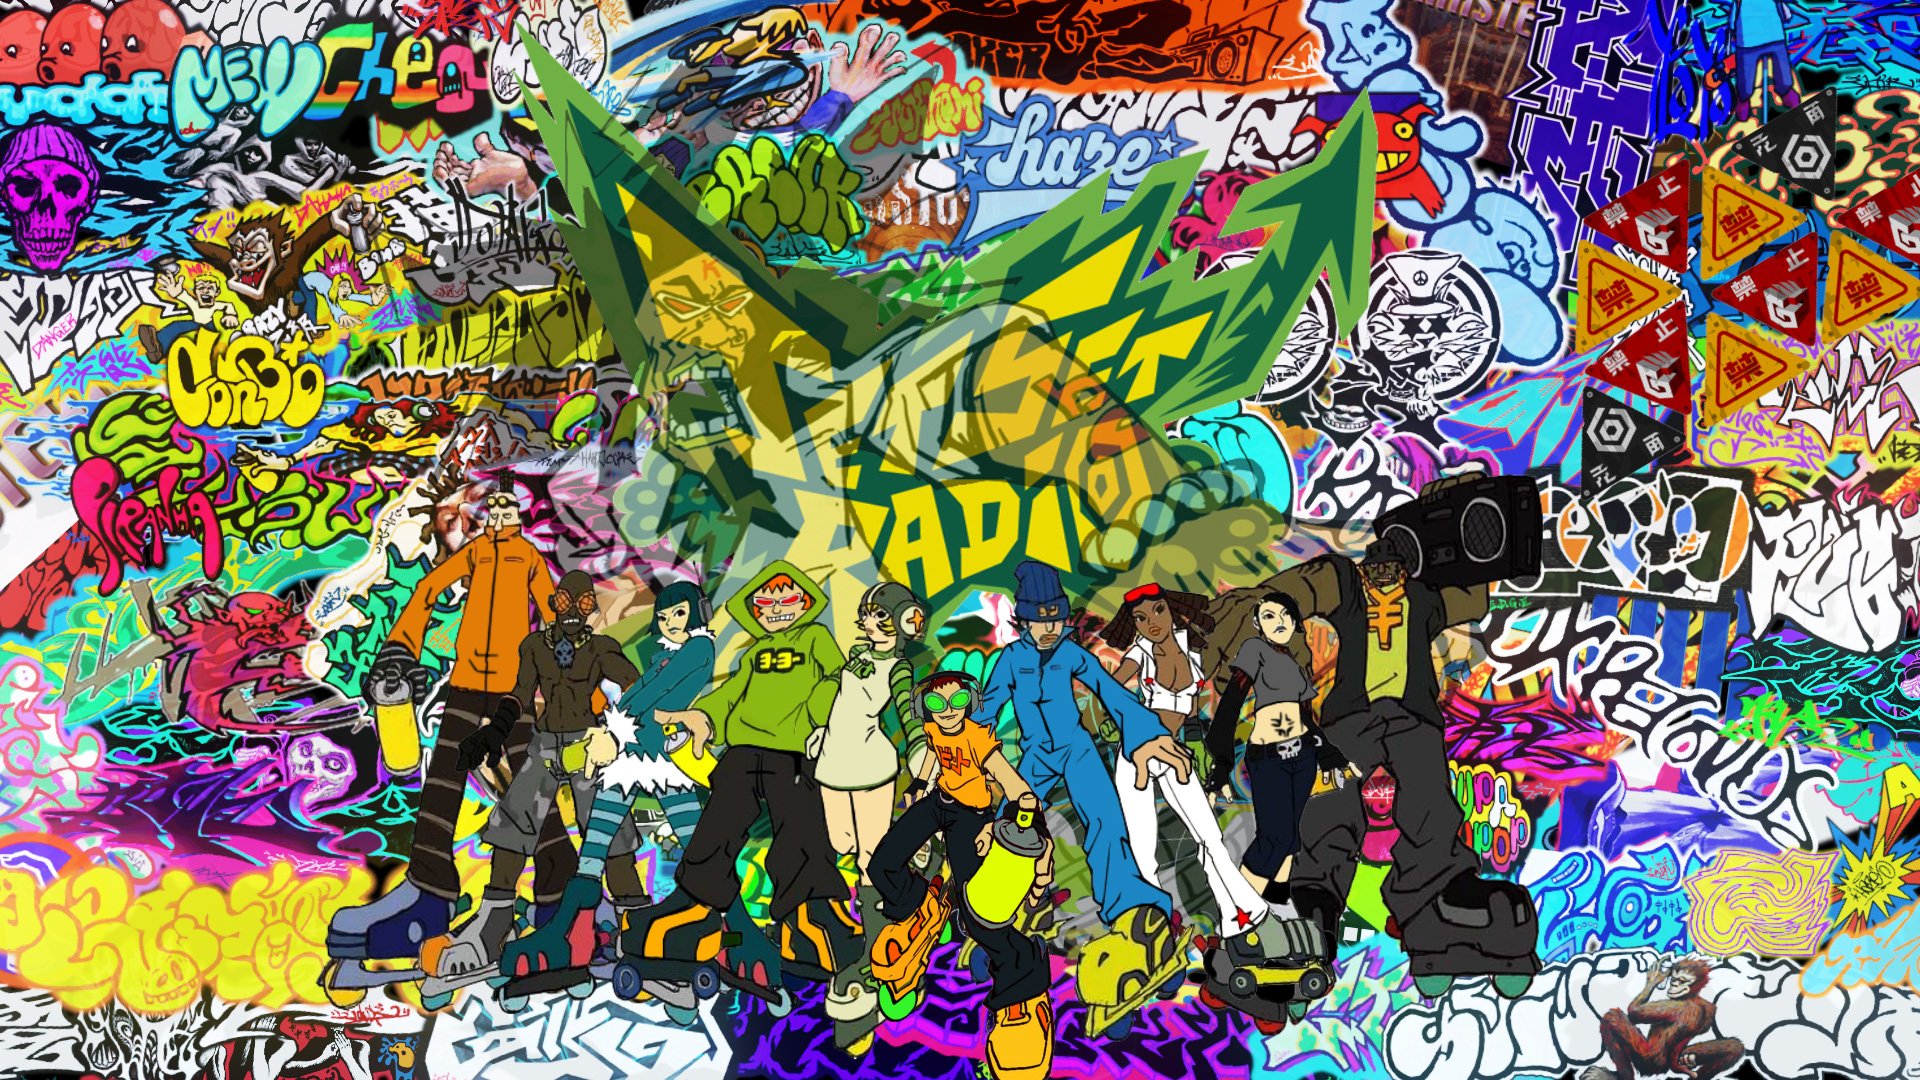 Jet set radio hd papers and backgrounds